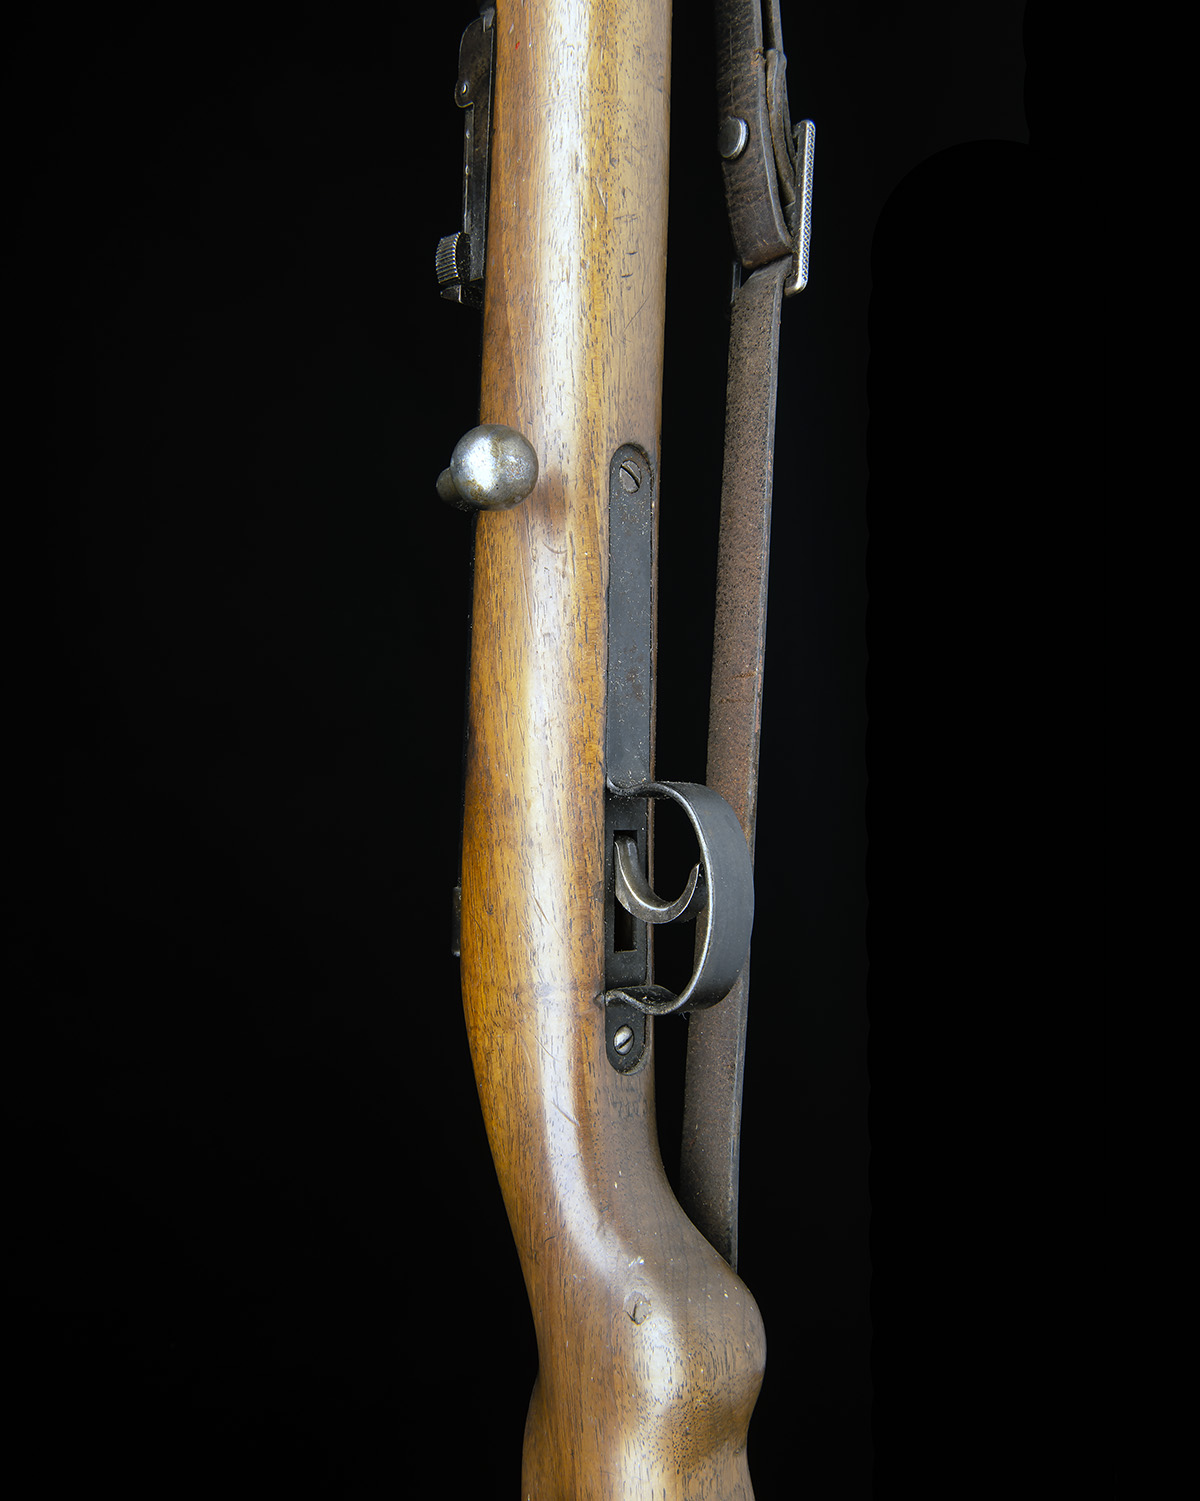 A 4.4mm BOLT-ACTION SPRING AIR-RIFLE, UNSIGNED, MODEL 'MARS 115 MILITARY TRAINER', serial no. 710295 - Image 3 of 6